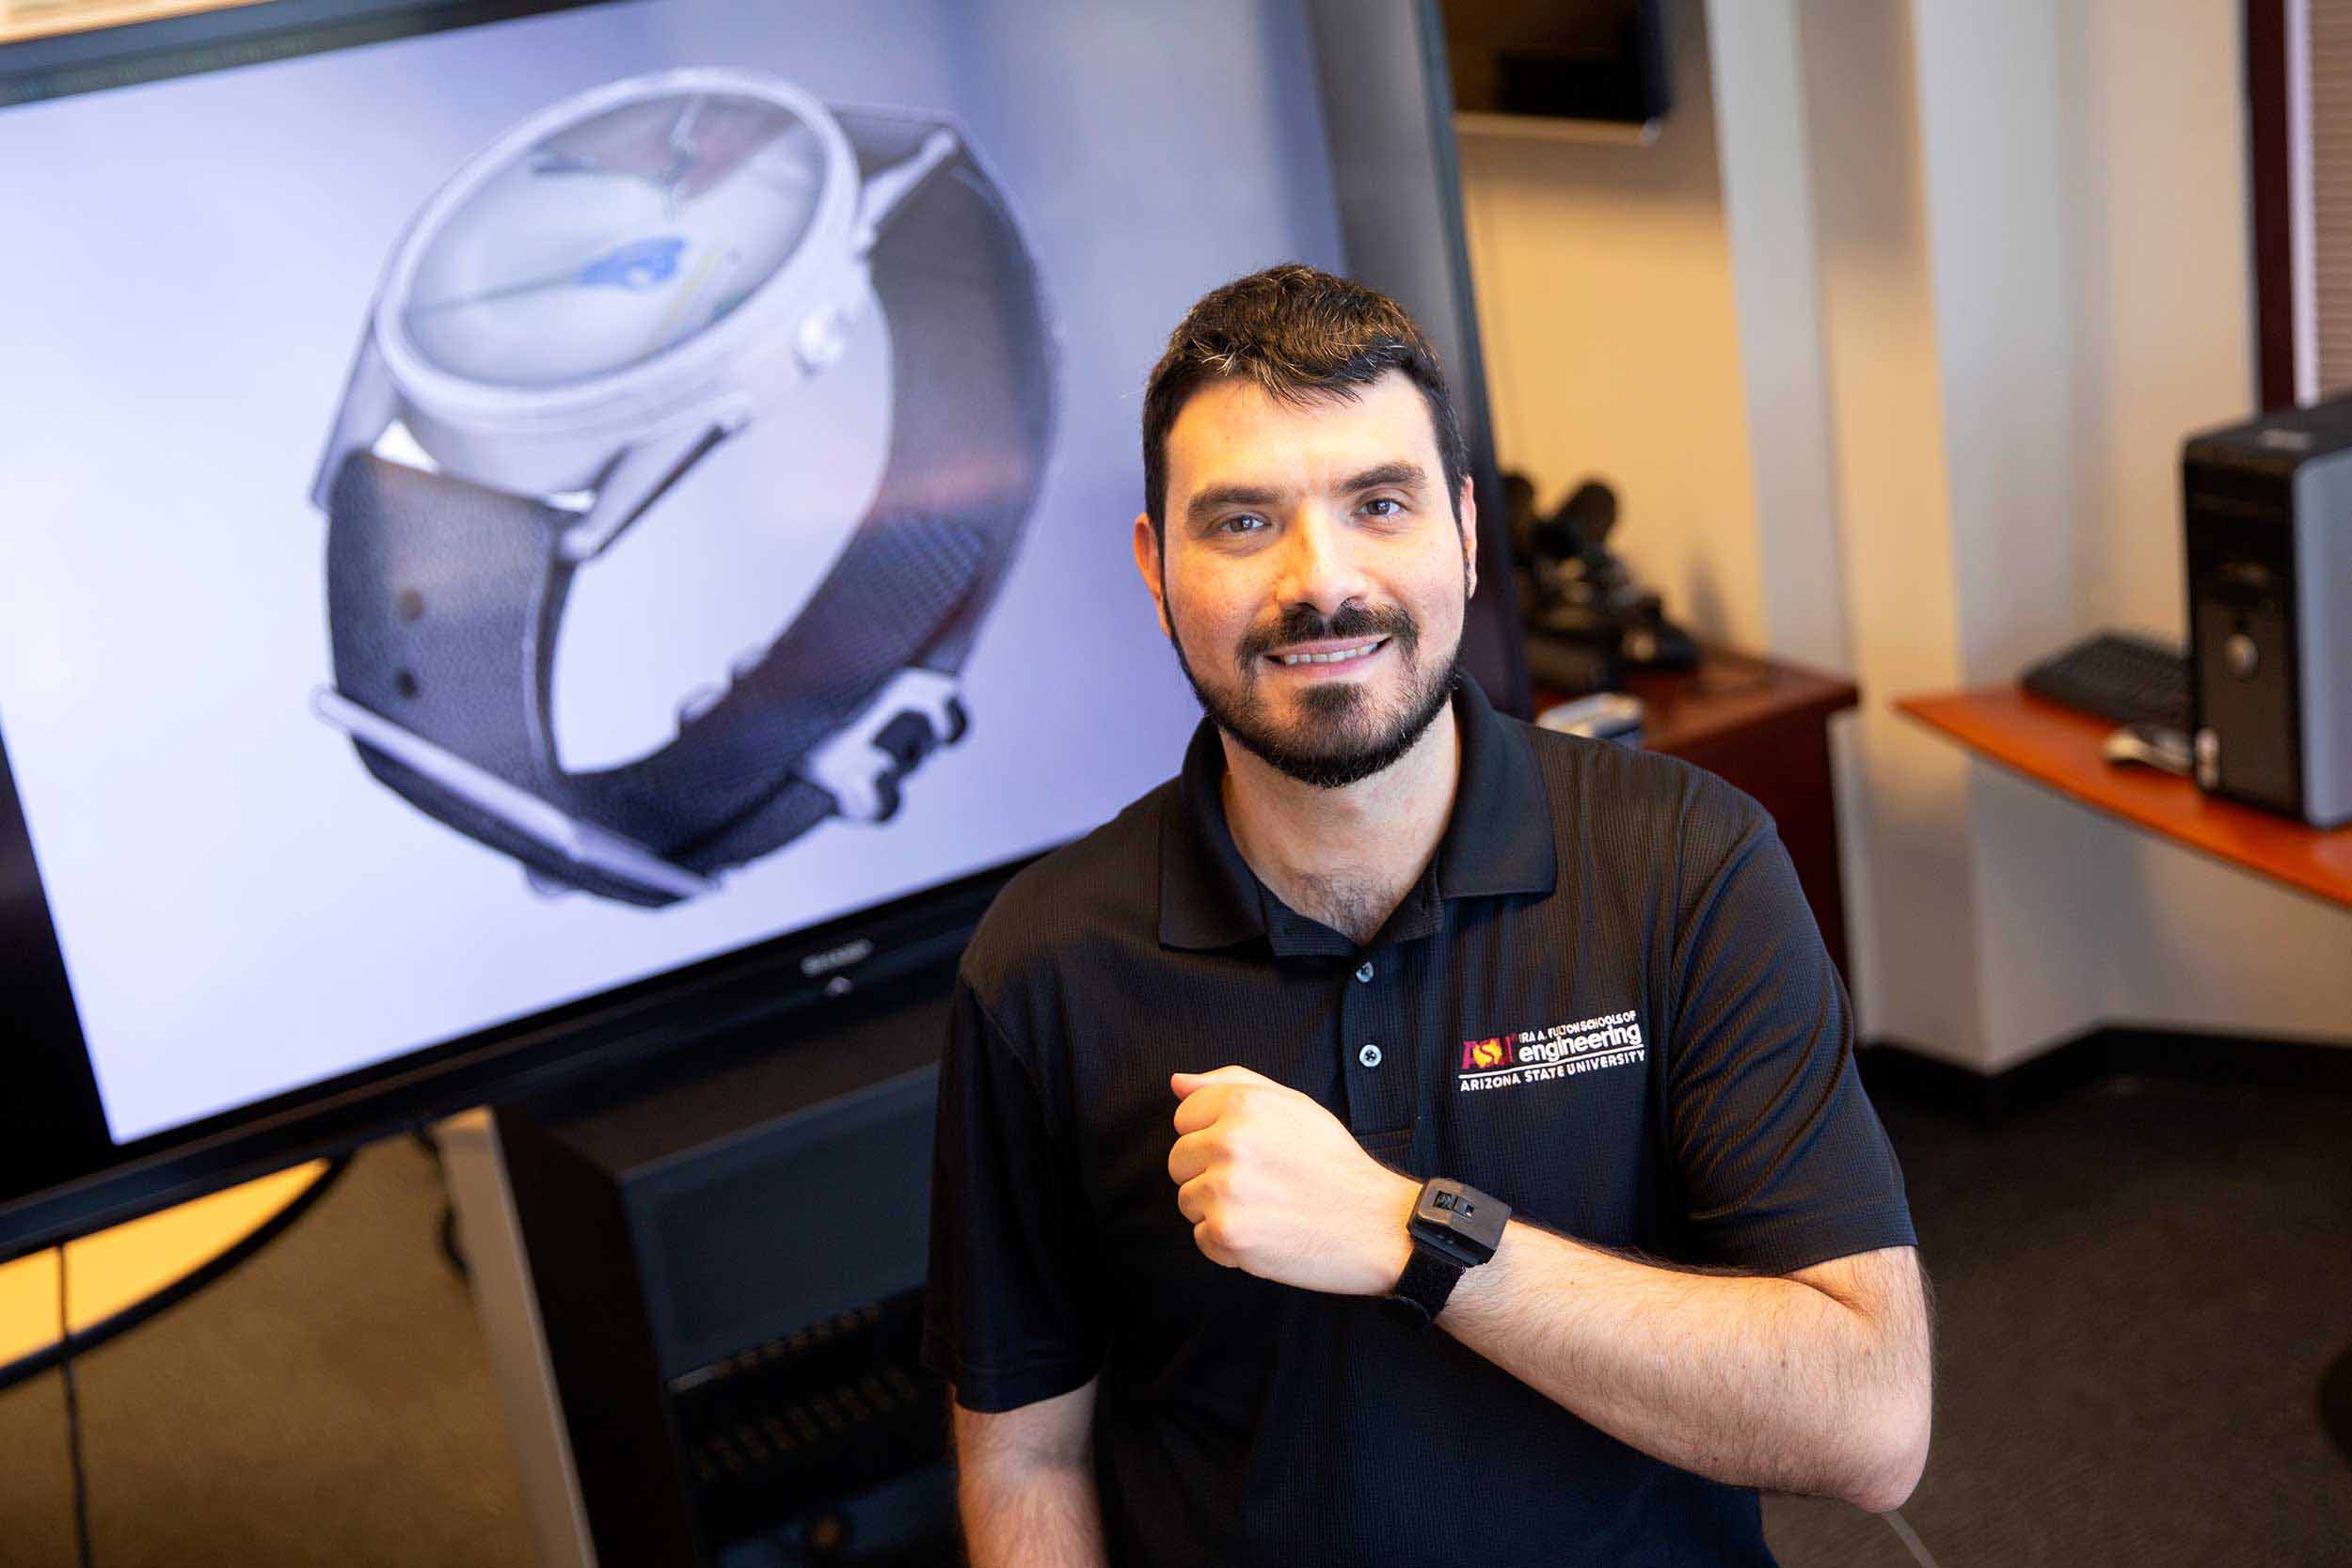 Troy McDaniel stands looking at the camera in his lab, displaying his wrist device that showcases his technology